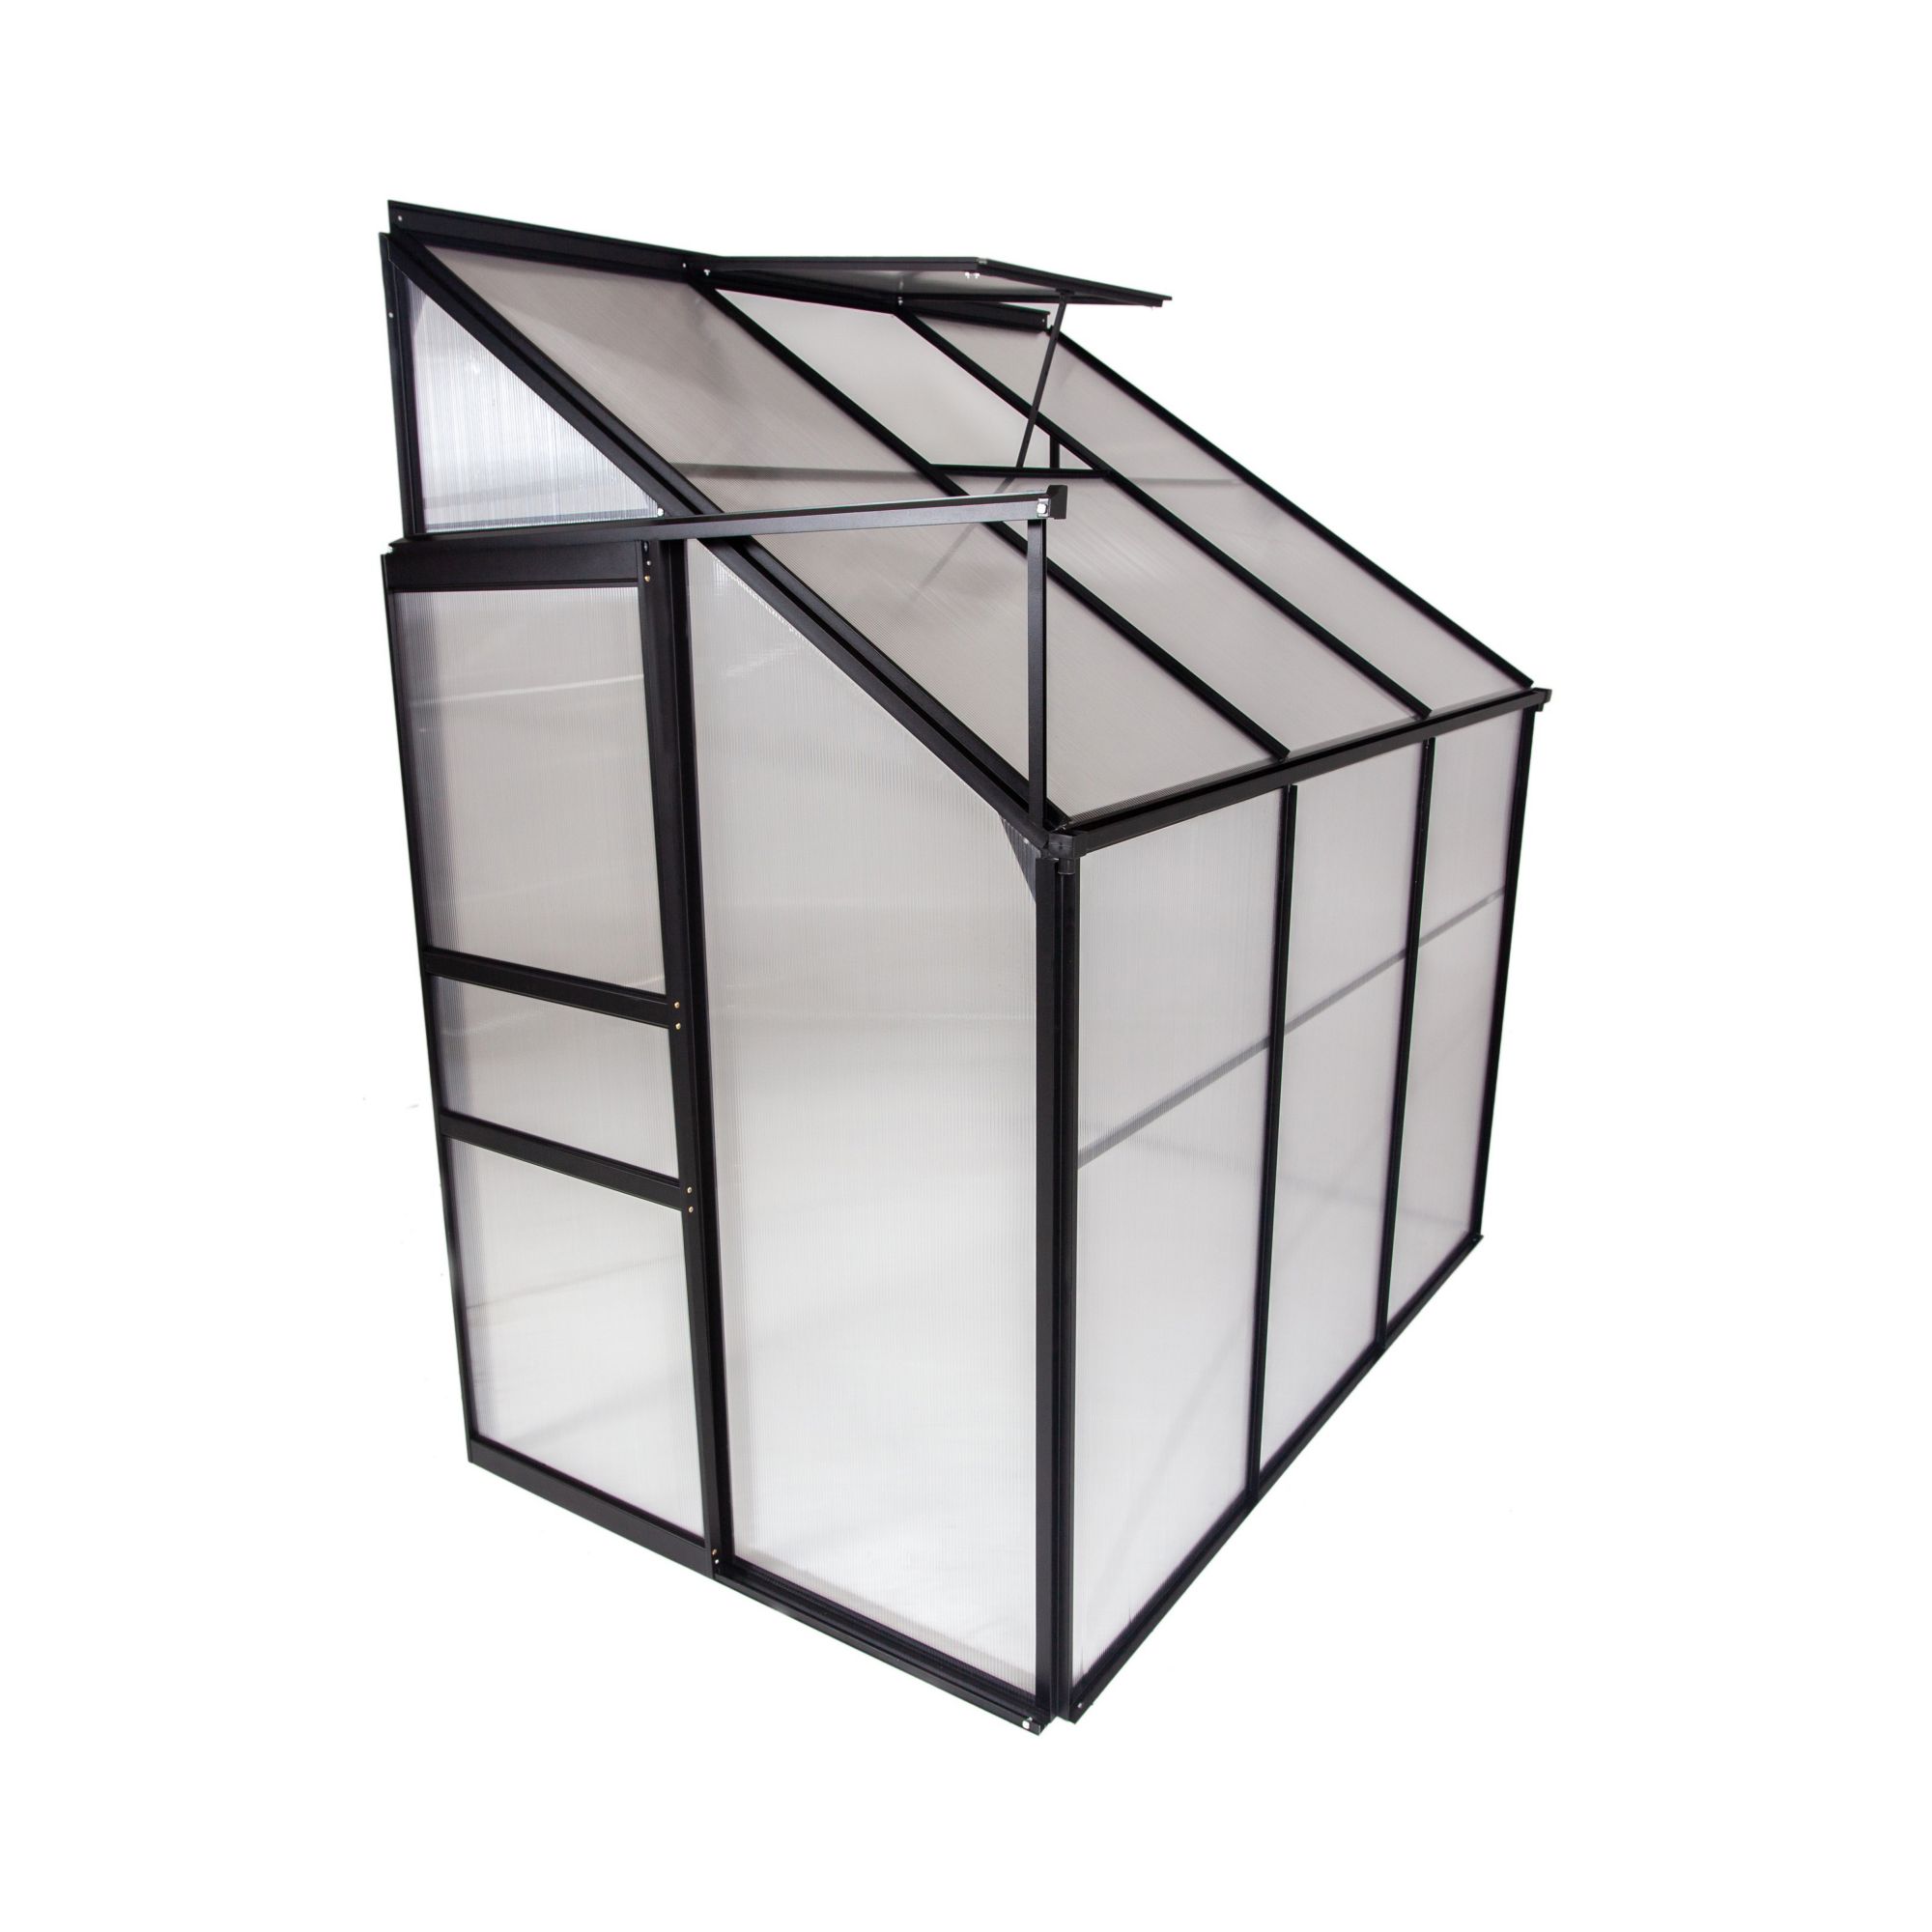 Ogrow 4' x 6' Lean-To-Wall Walk-In Greenhouse with Sliding Door, Adjustable Roof Vent, and Heavy-Duty Aluminum Frame